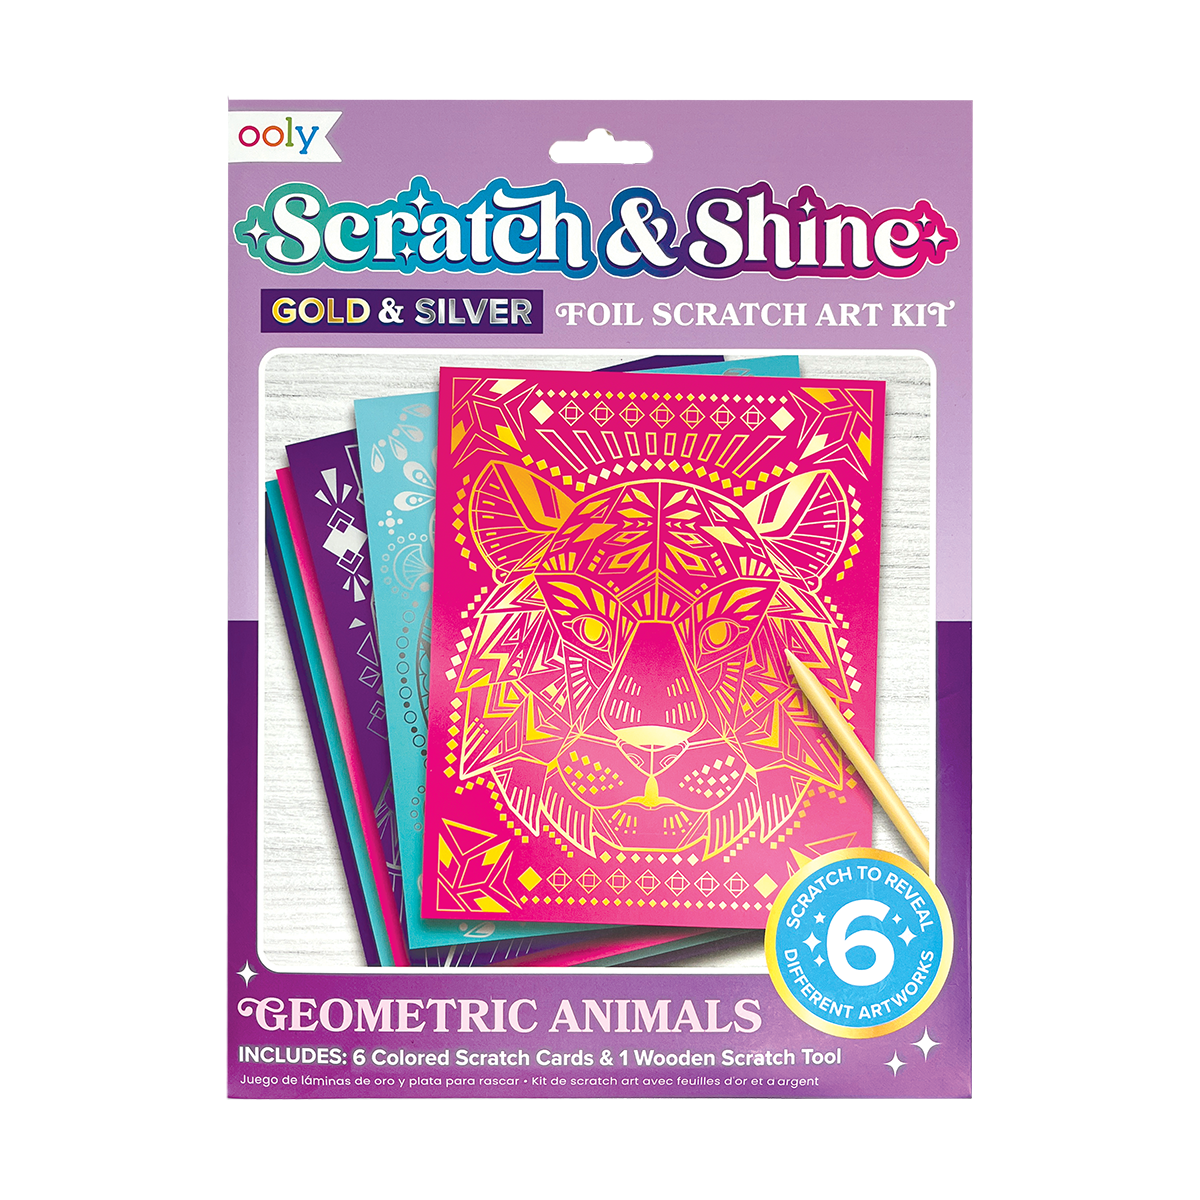 Scratch and Shine Foil Scratch Art Kit - Geometric Animals - OOLY